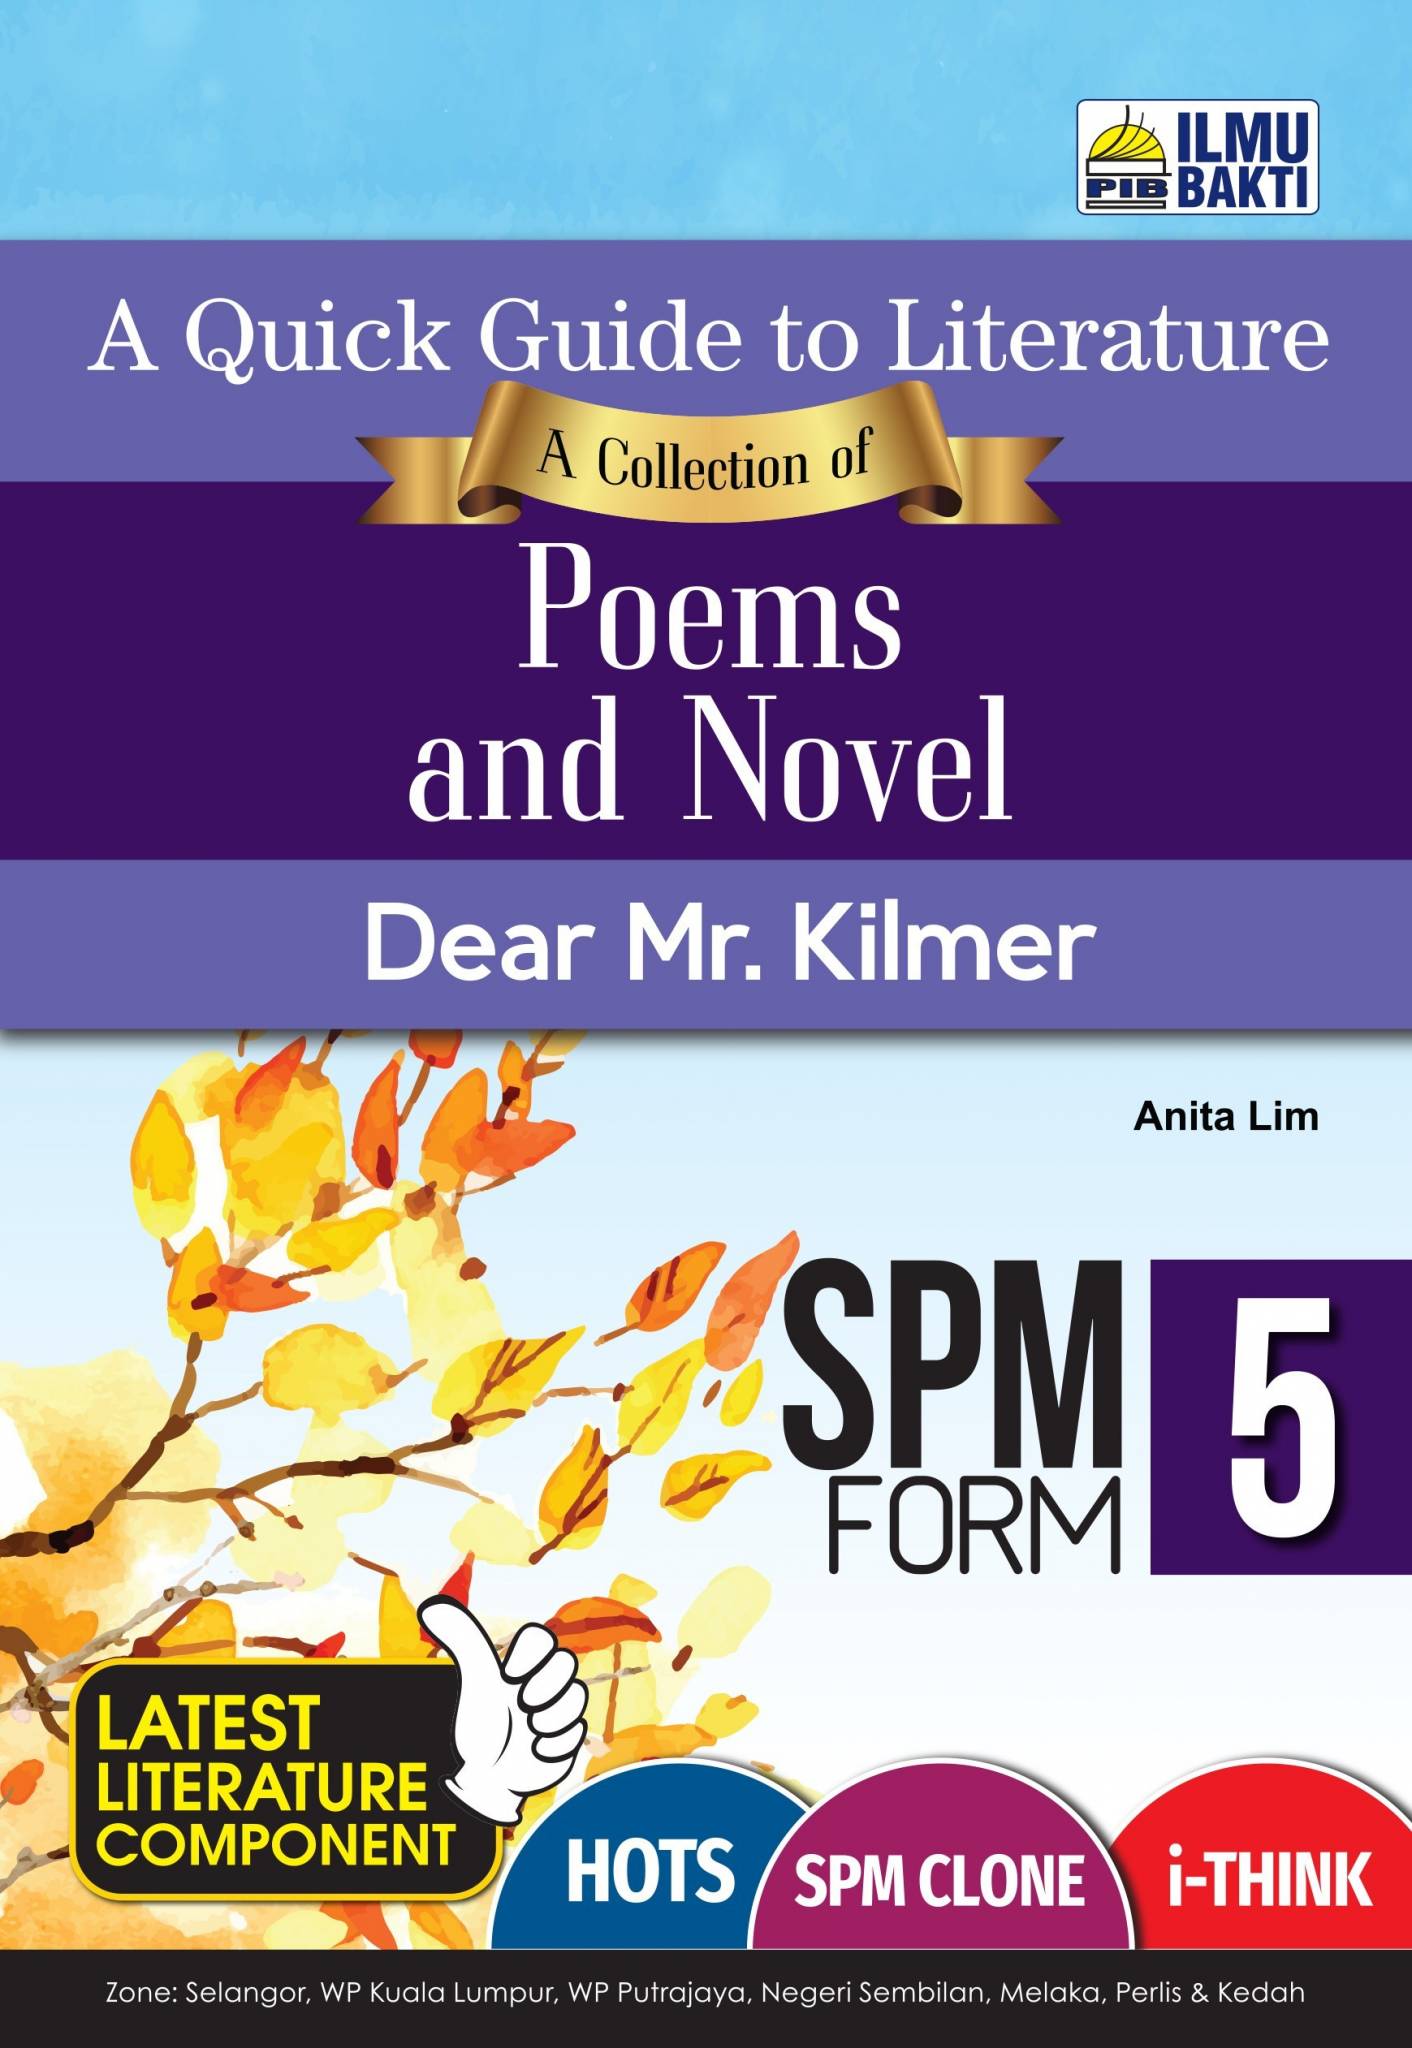 A QUICK GUIDE TO LITERATURE A COLLCETION OF POEMS AND NOVEL DEAR MR